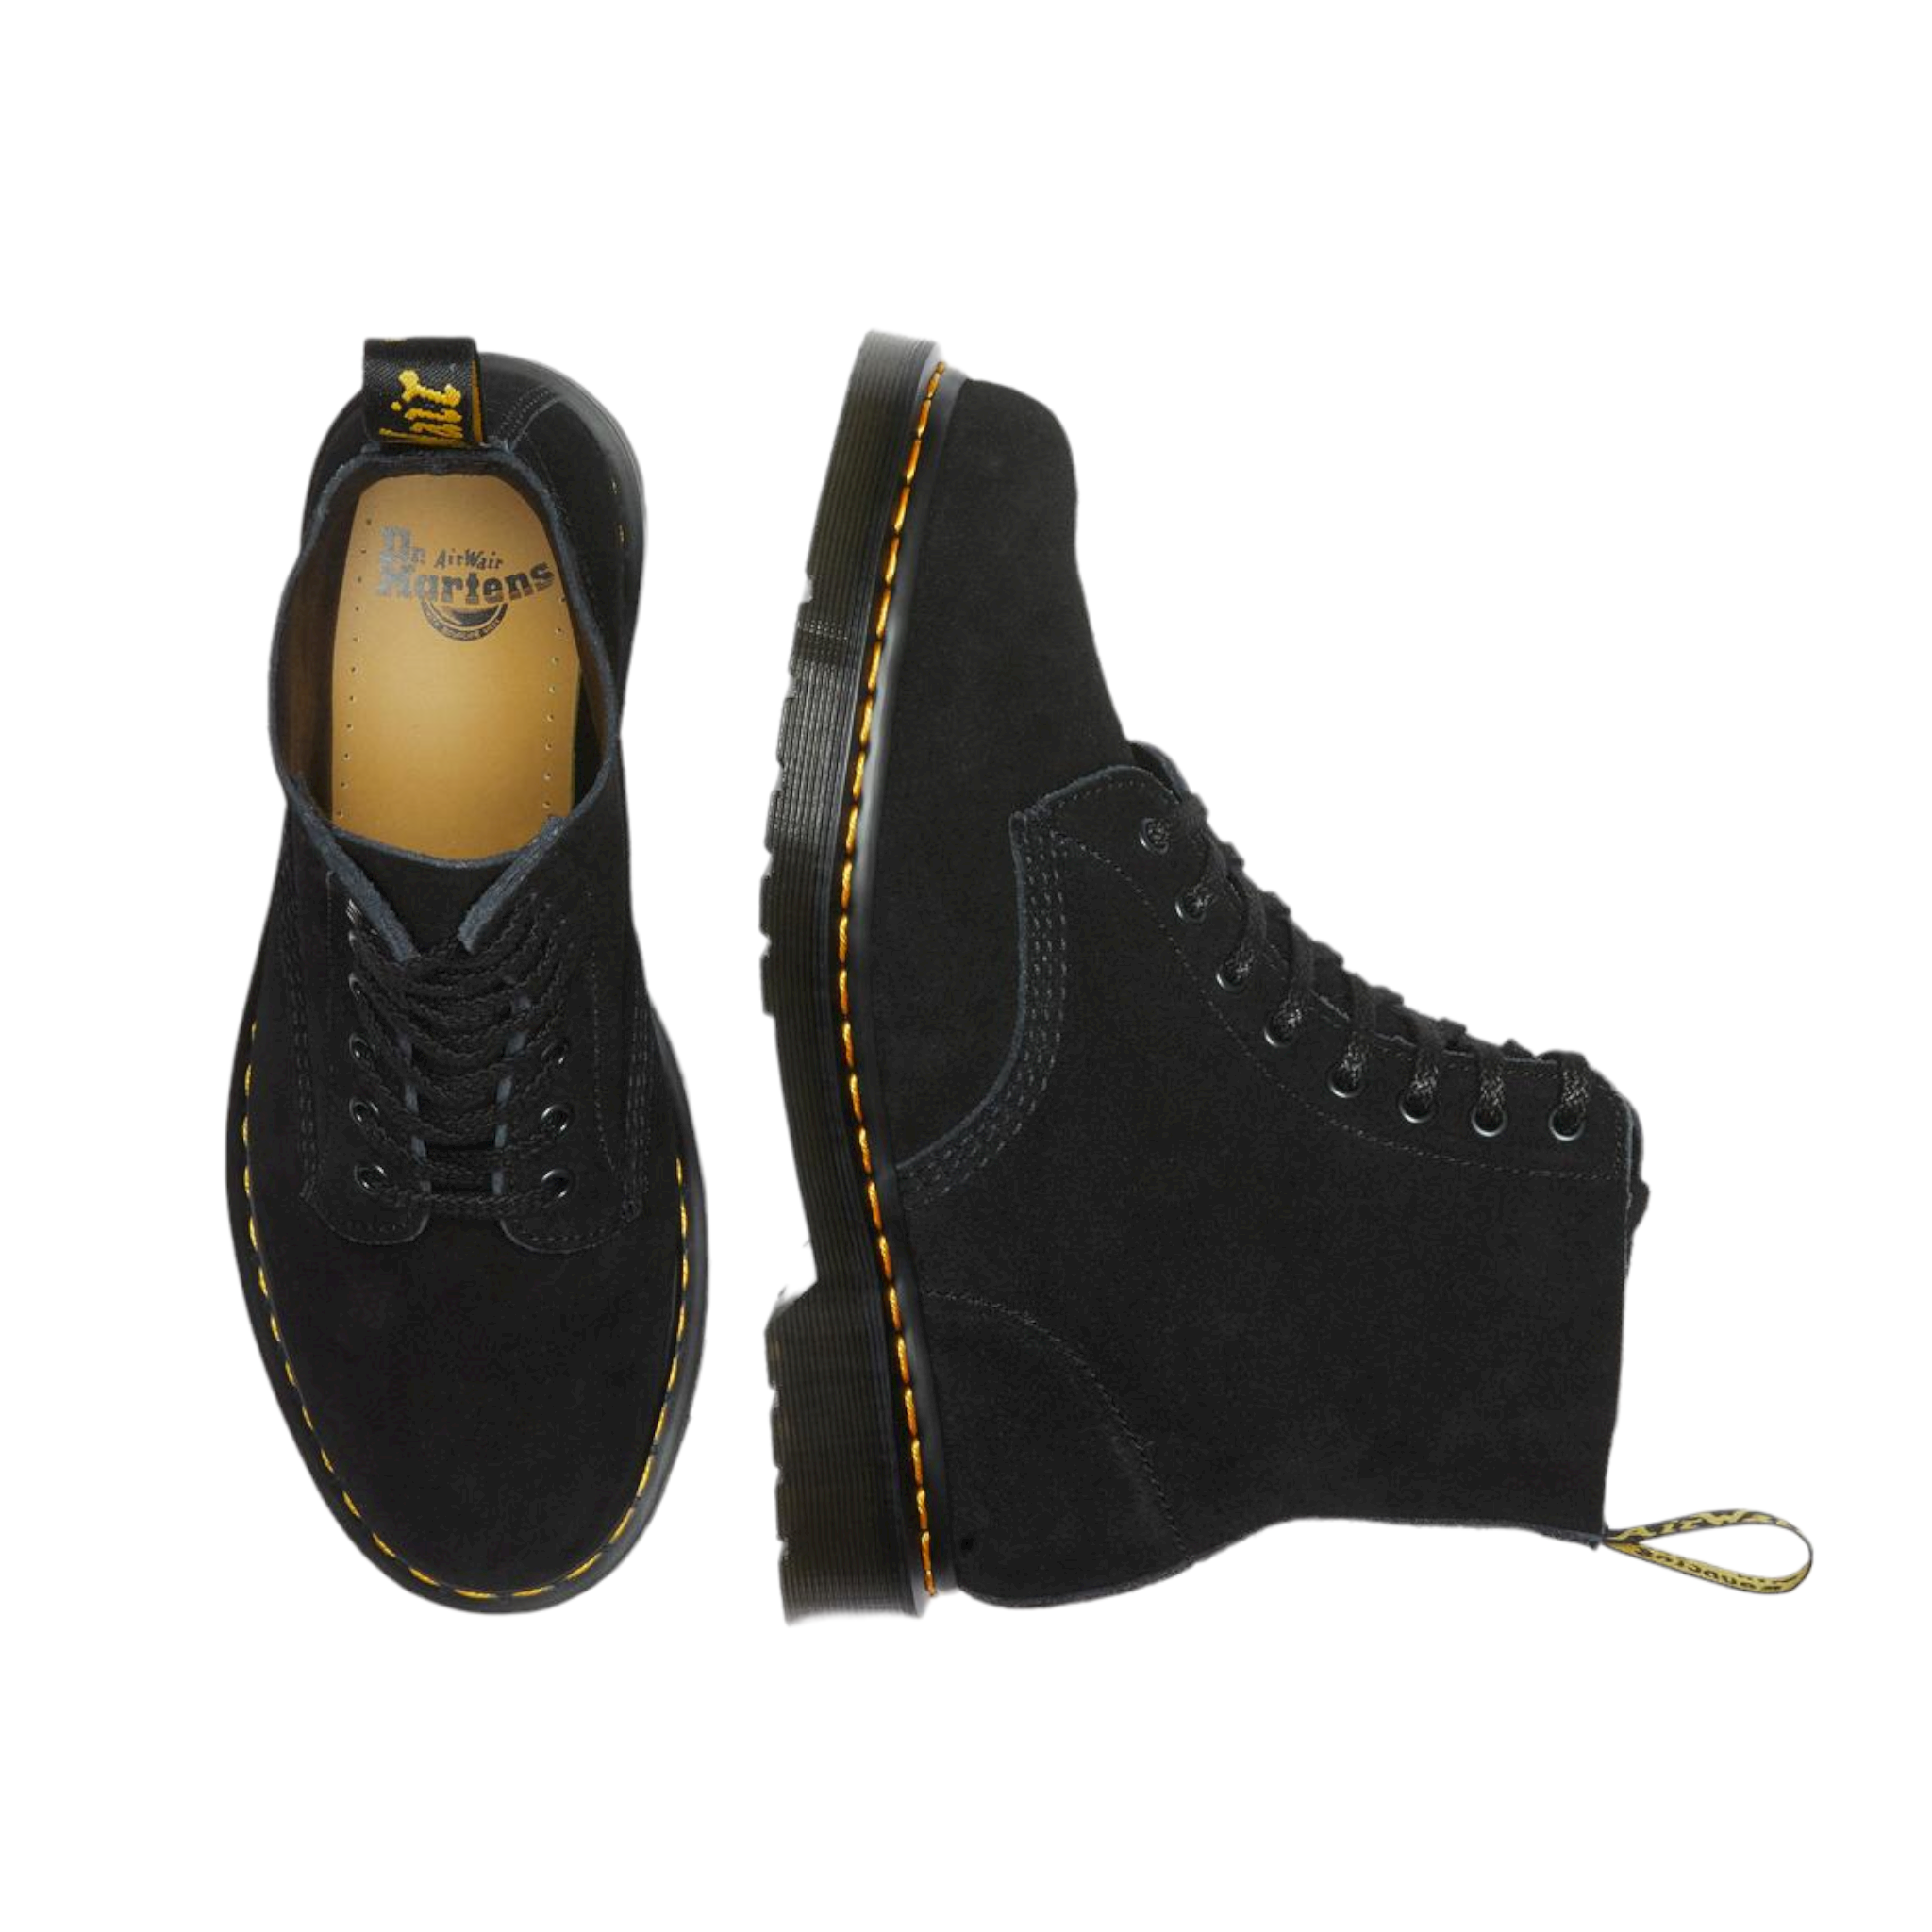 1460 Pascal Suede - shoe&amp;me - Dr. Martens - Boot - Boots, Summer 22, Unisex, Womens